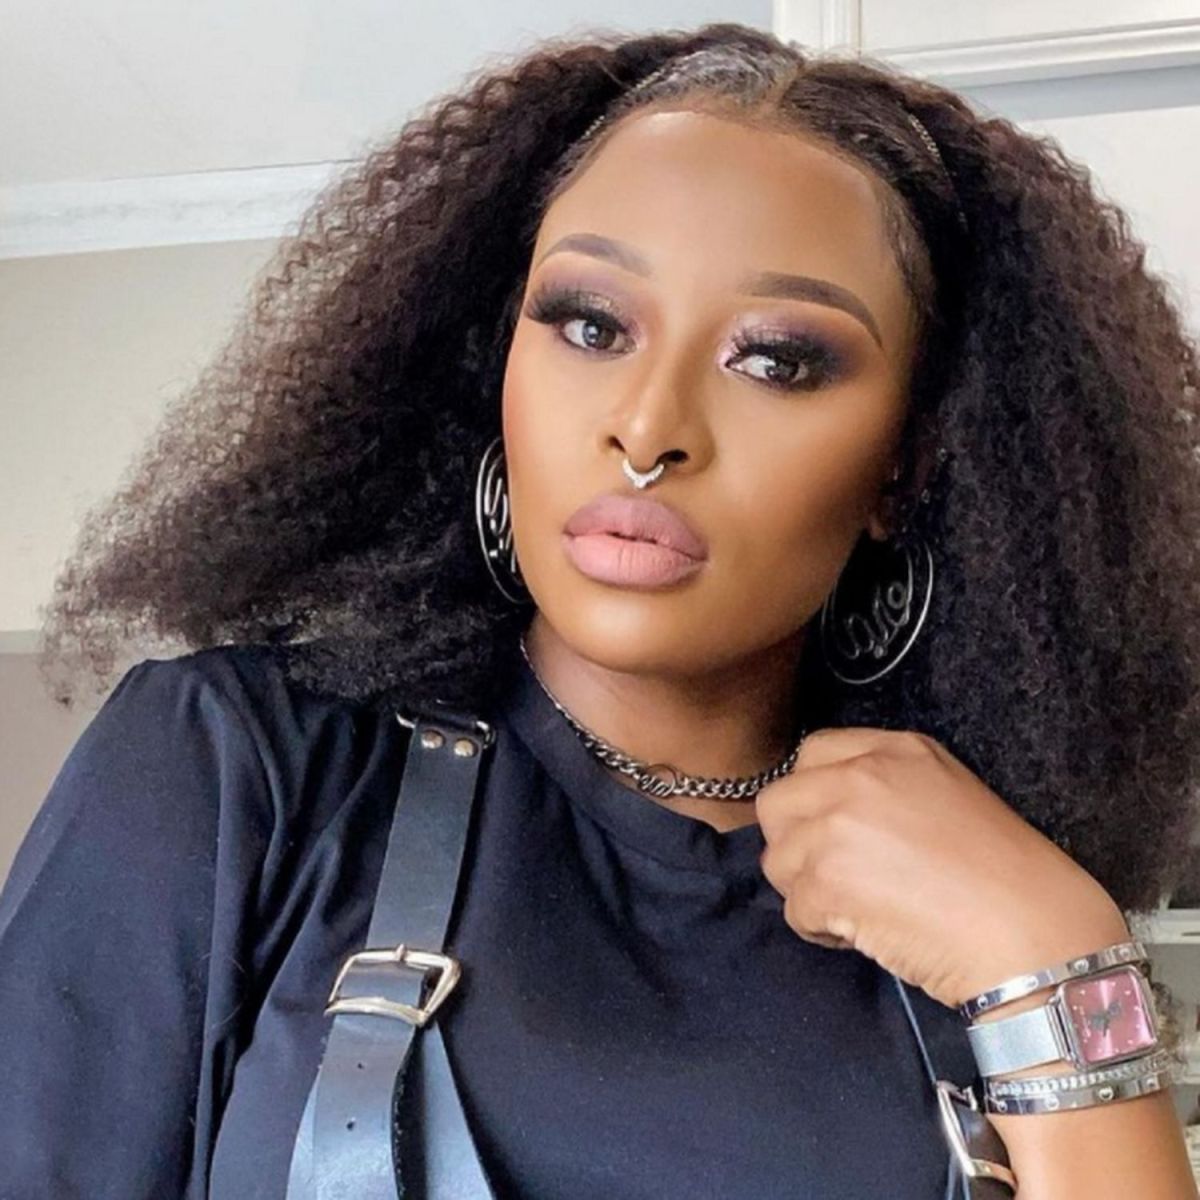 Dj Zinhle Reacts To Backlash Over Not Knowing How To Cook 1